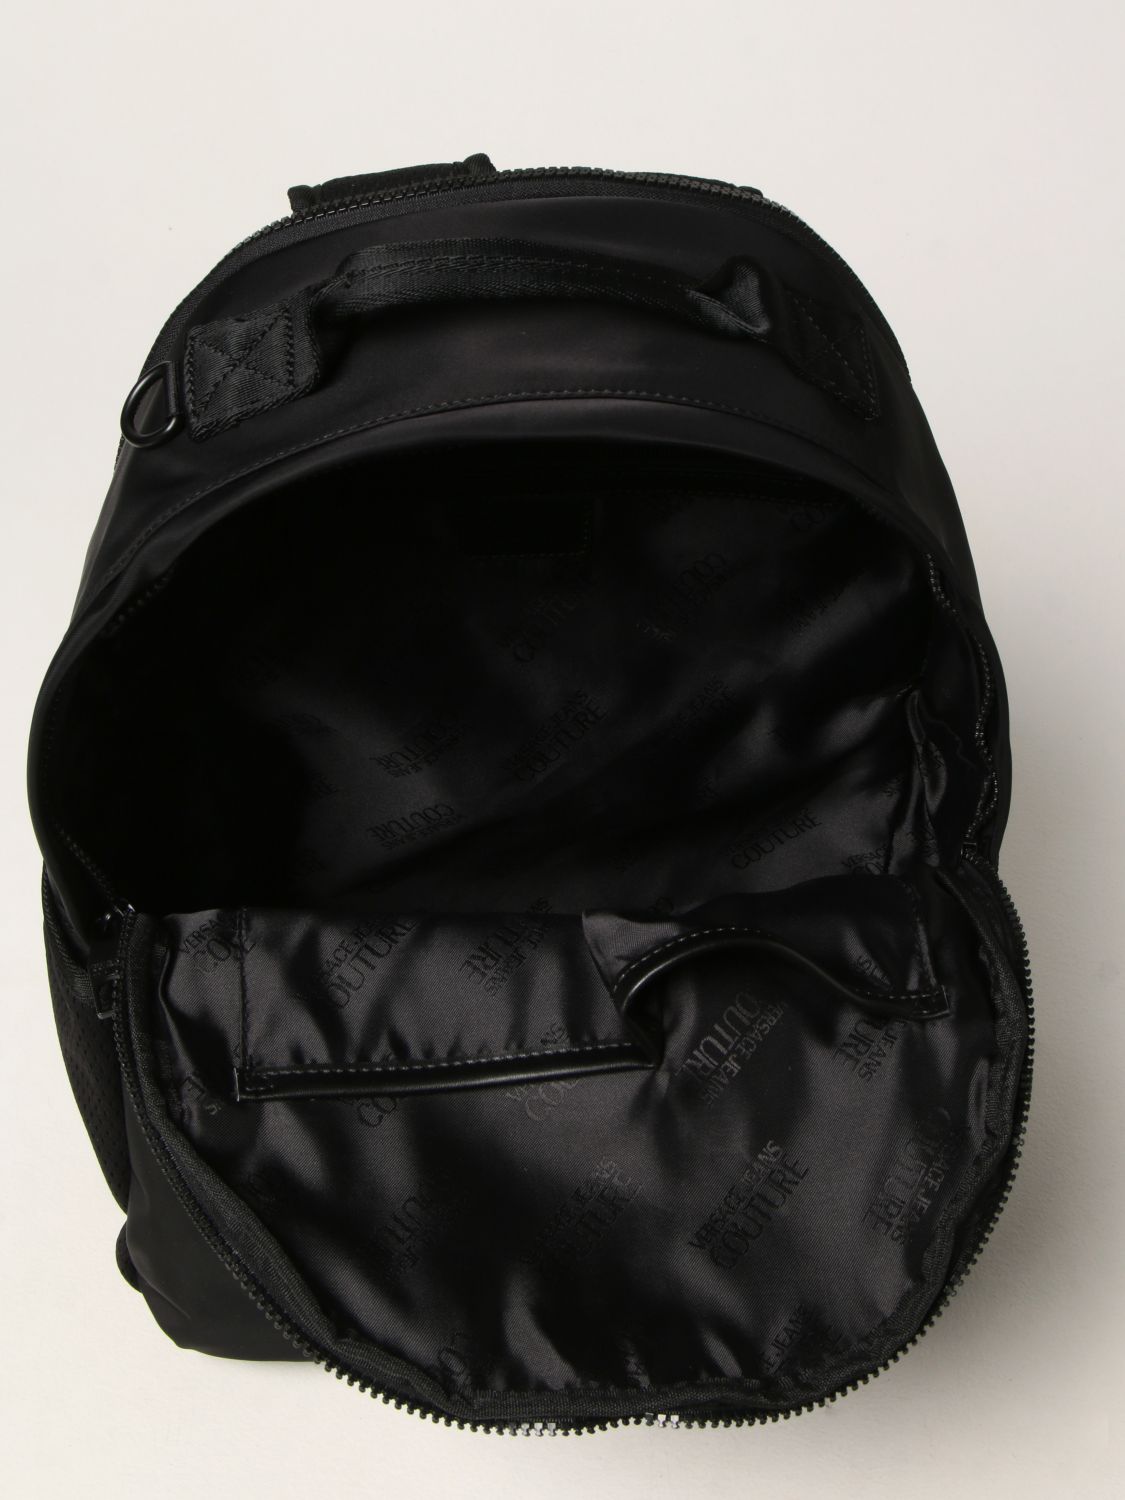 VERSACE JEANS COUTURE: nylon backpack - Black | Versace Jeans Couture ...